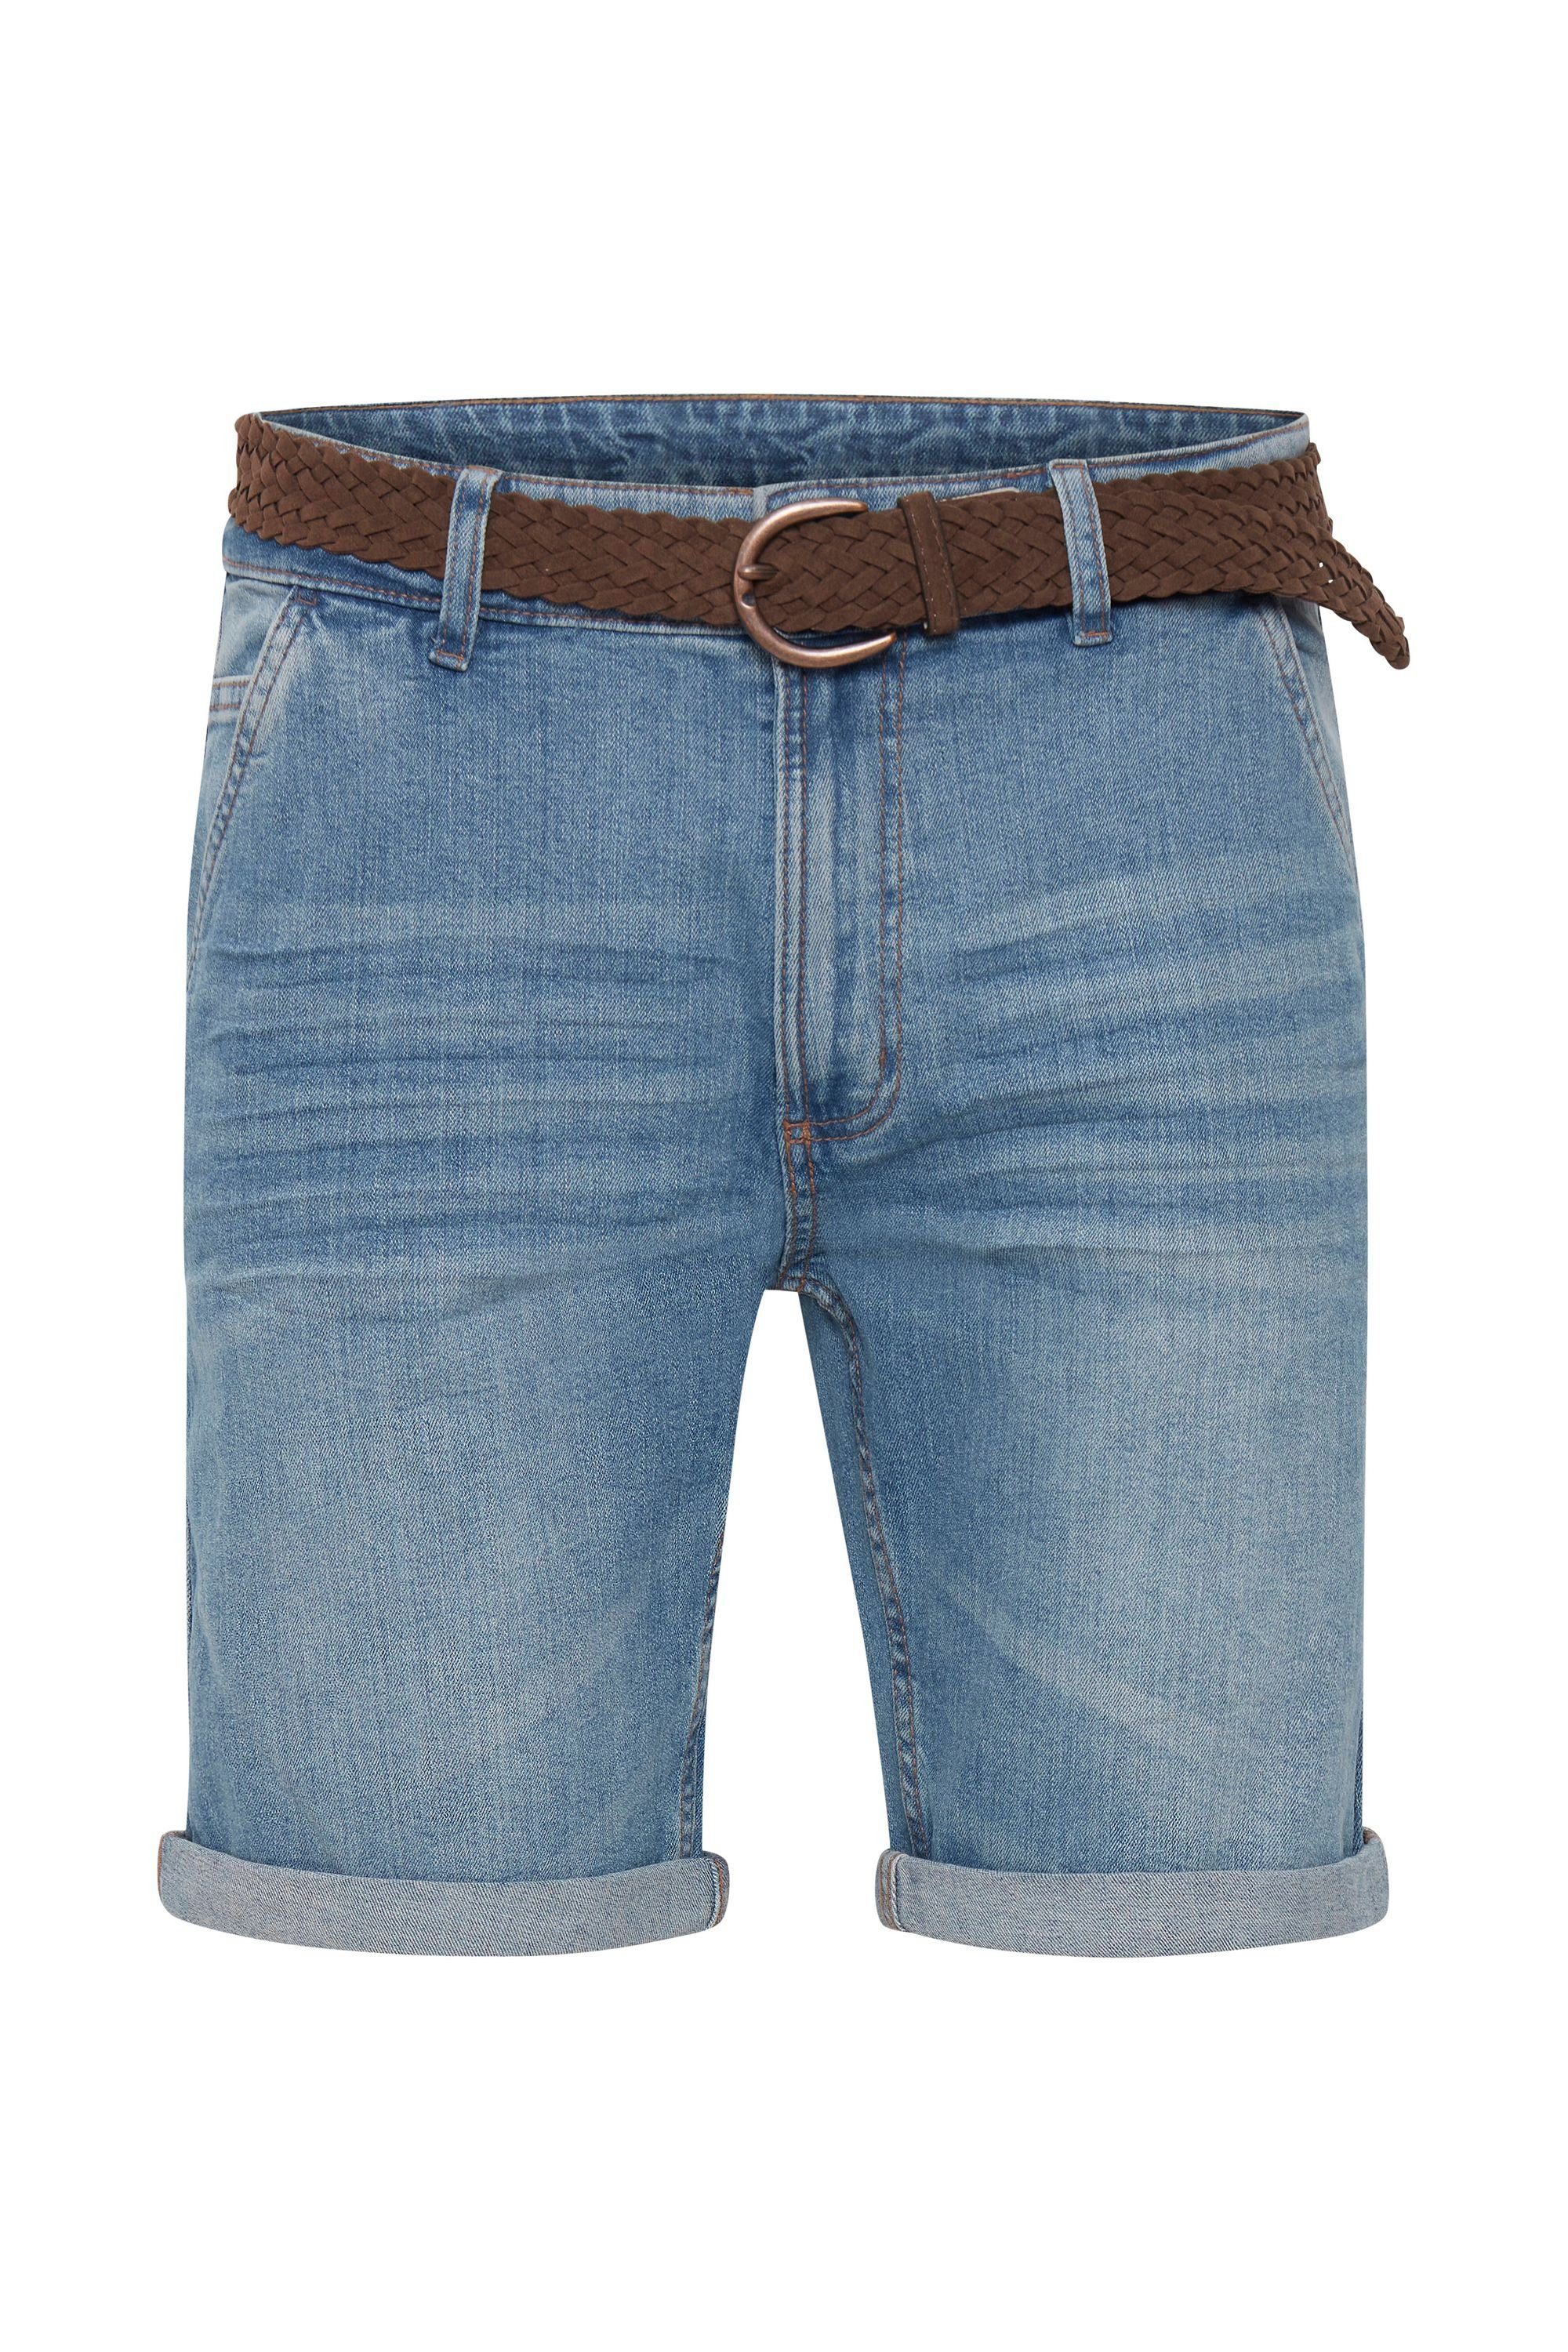 Indicode Jeansshorts IDQuincy Blue Wash (1014)